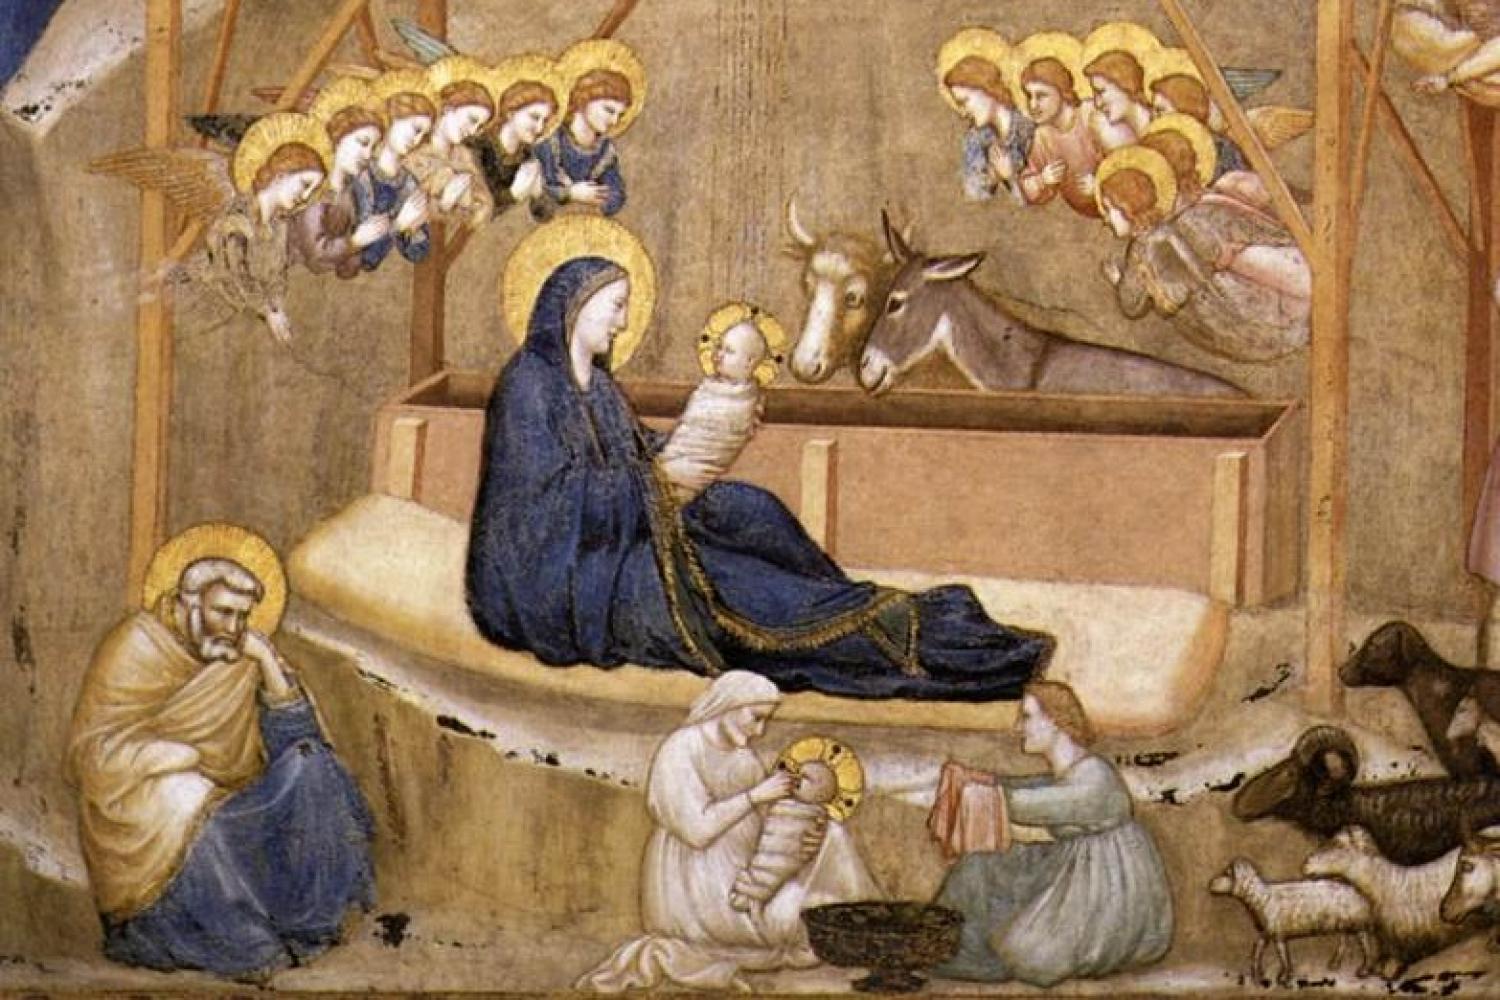 Giotto's "Nativity" from the Lower Church of the Basilica of Saint Francis in Assisi